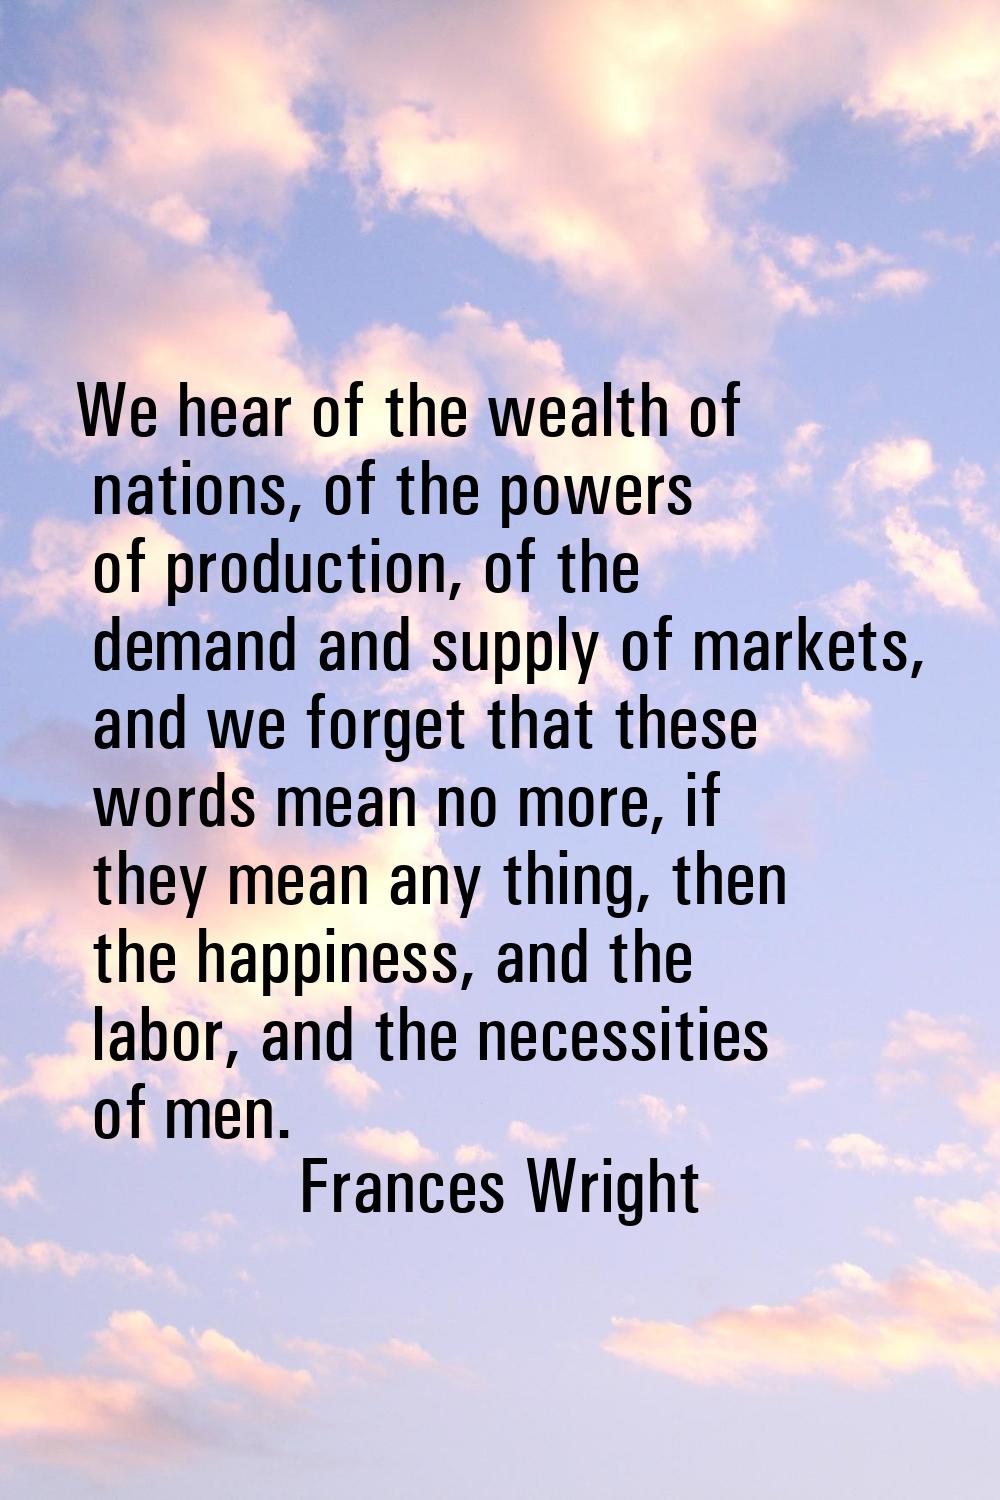 We hear of the wealth of nations, of the powers of production, of the demand and supply of markets,